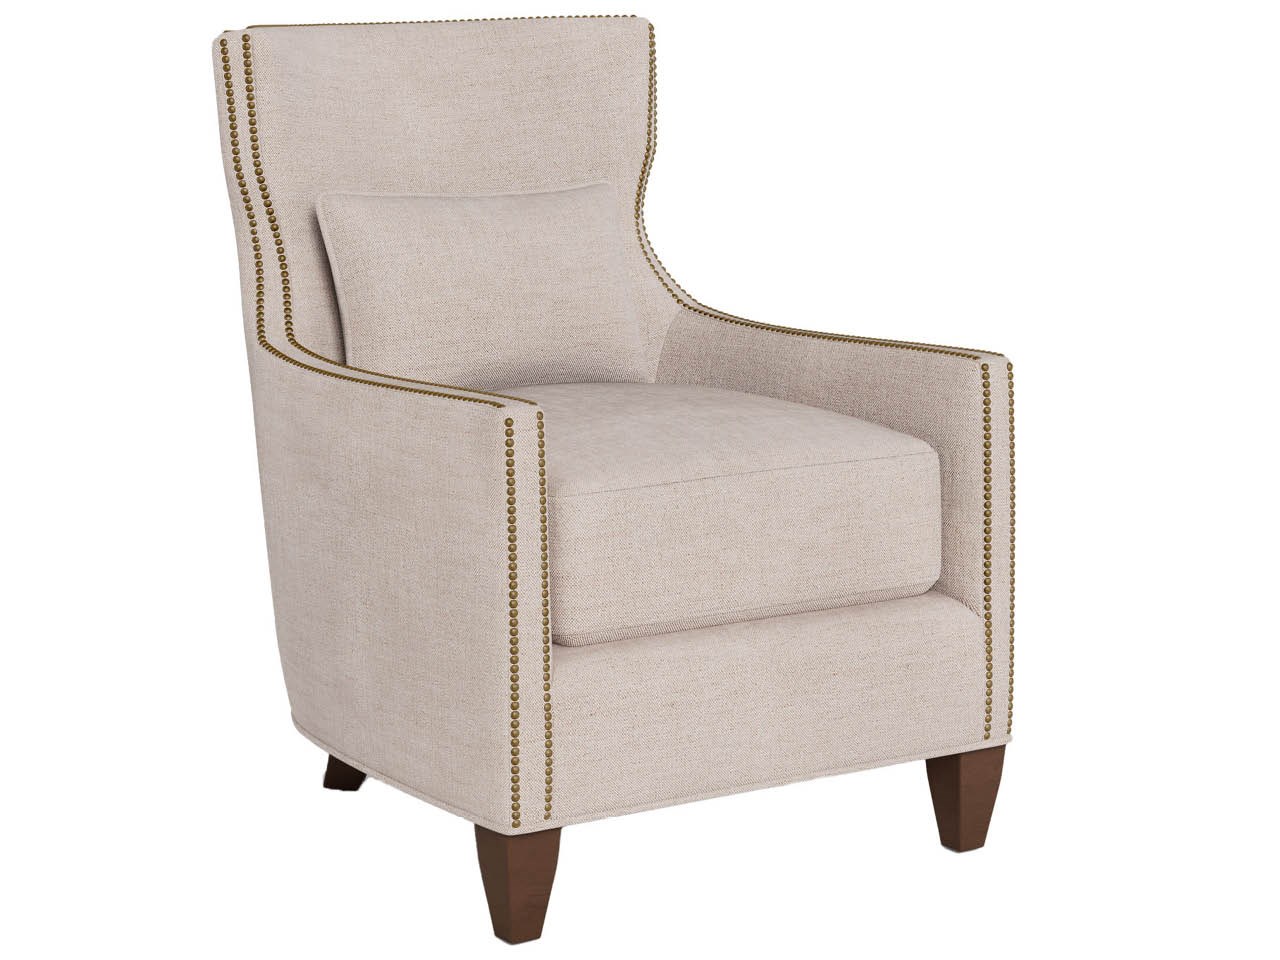 Barrister Accent Chair - Special Order